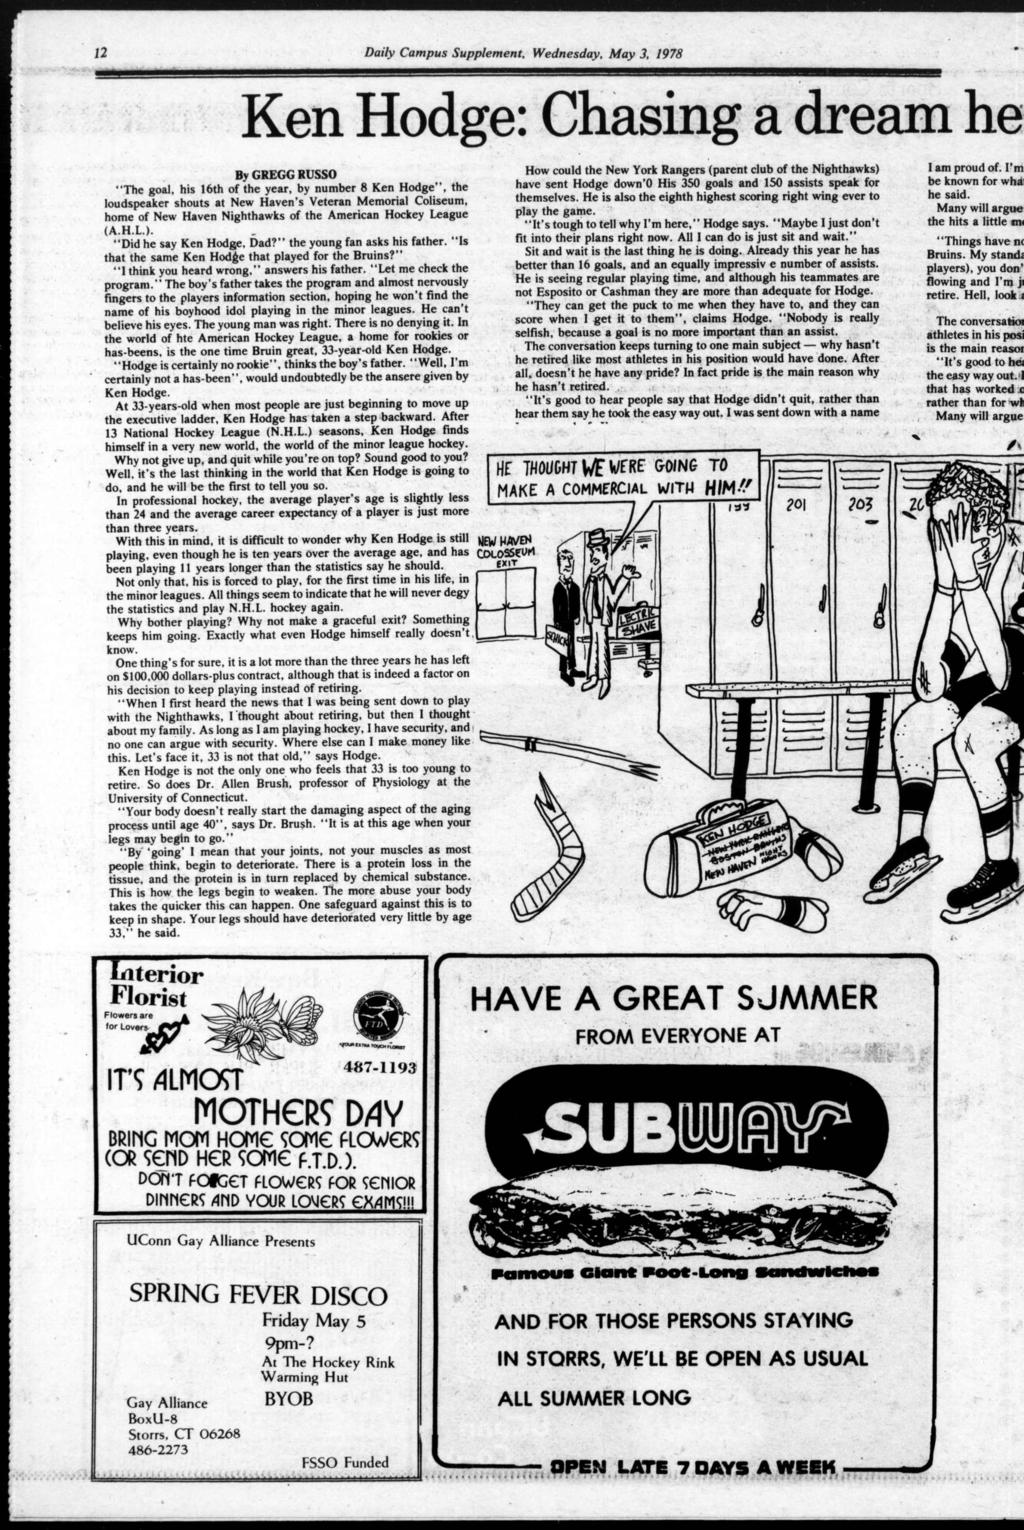 12 Daly Campus Supplement, Wednesday, May 3, 1978 Ken Hodge: Chasng a dream he By GREGG RUSSO "The goal, hs 16th of the year, by number 8 Ken Hodge", the loudspeaker shouts at New Haven's Veteran